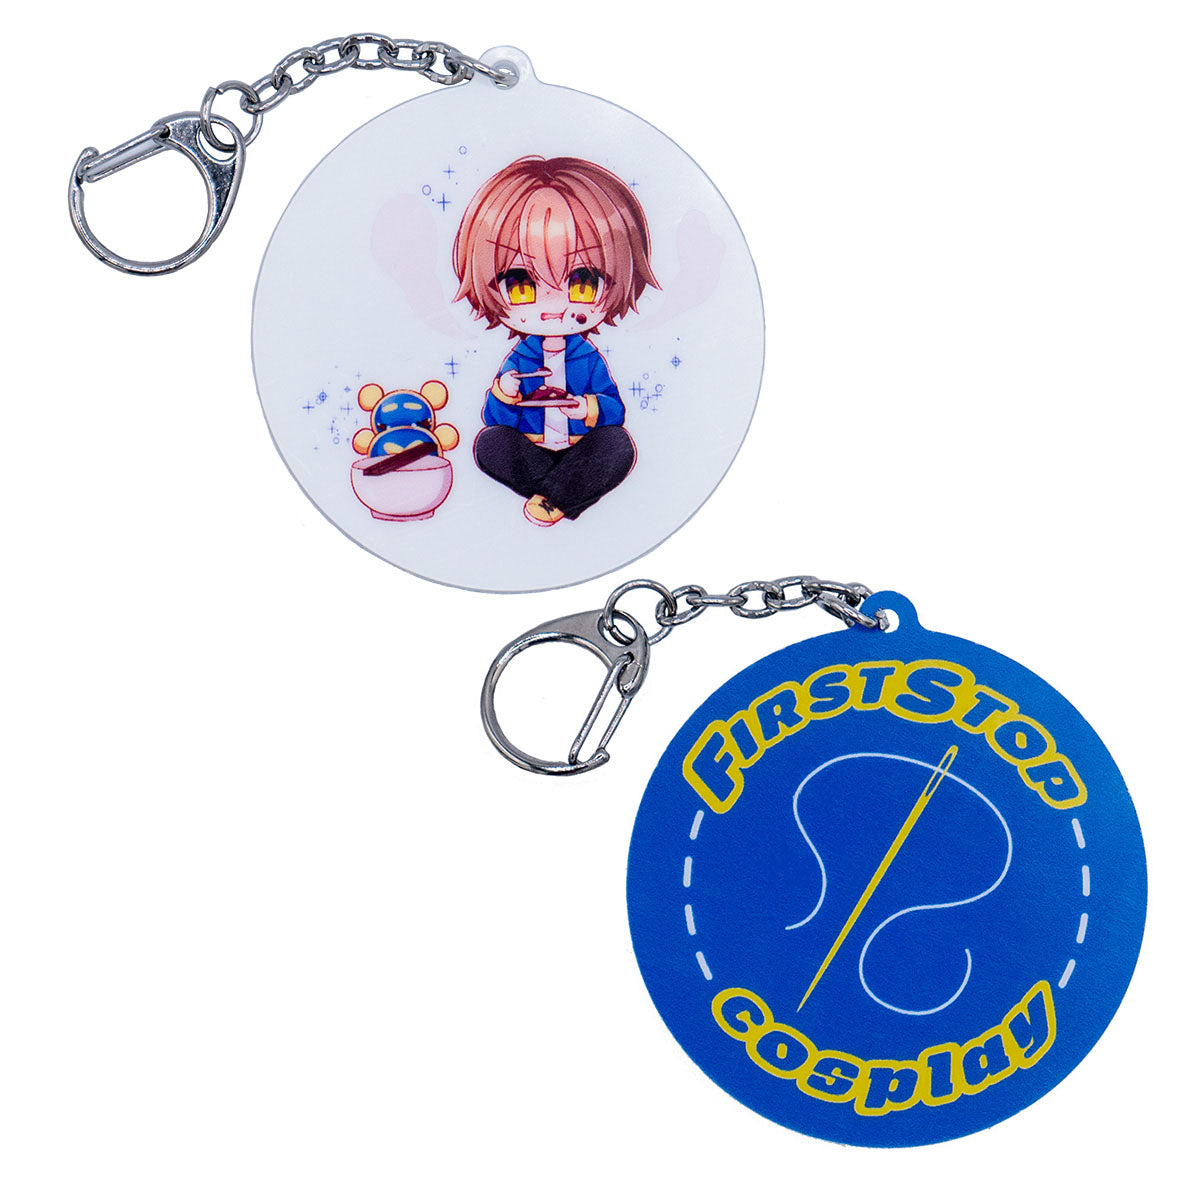 The front and back of the Dah keychain. Dah is the male character in chibi form eating curry and sitting next to Timmy figure with a bowl. The back of the keychain says "First Stop Cosplay" with a sewing needle.